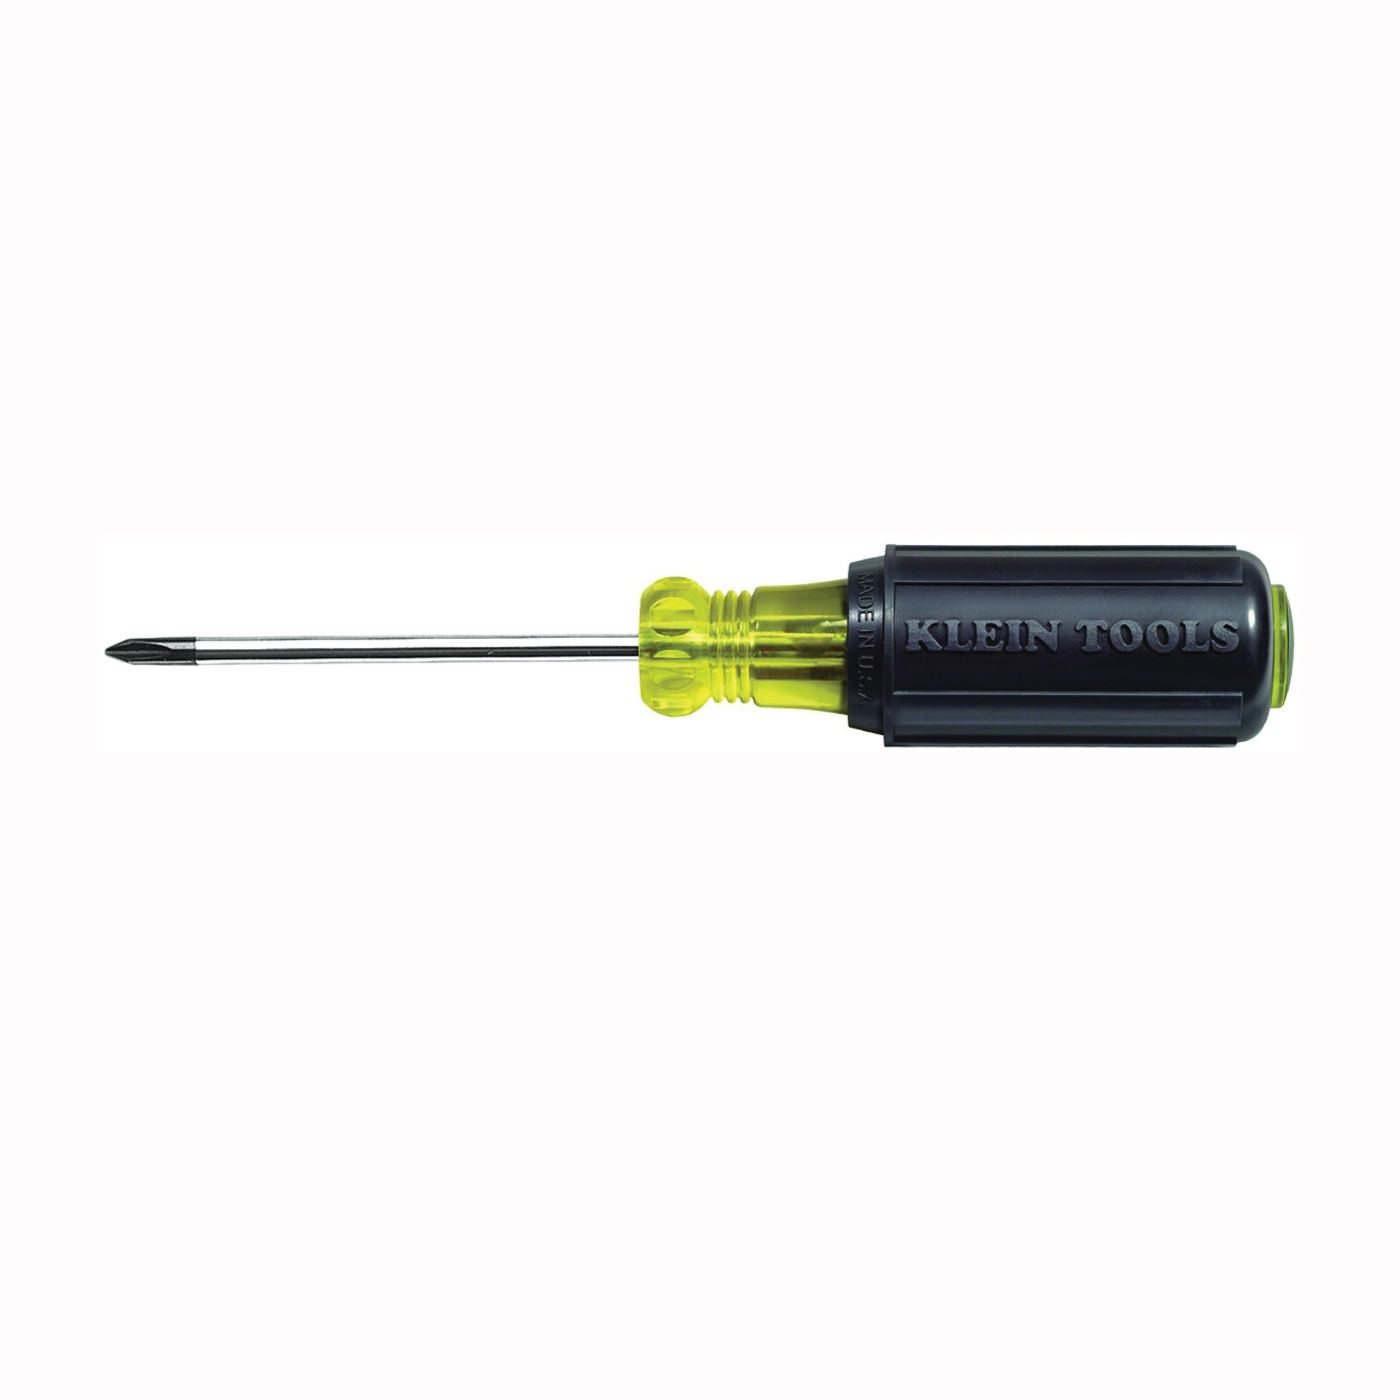 603-3 Screwdriver, #1 Drive, Phillips Drive, 6-3/4 in OAL, 3 in L Shank, Rubber Handle, Cushion-Grip Handle